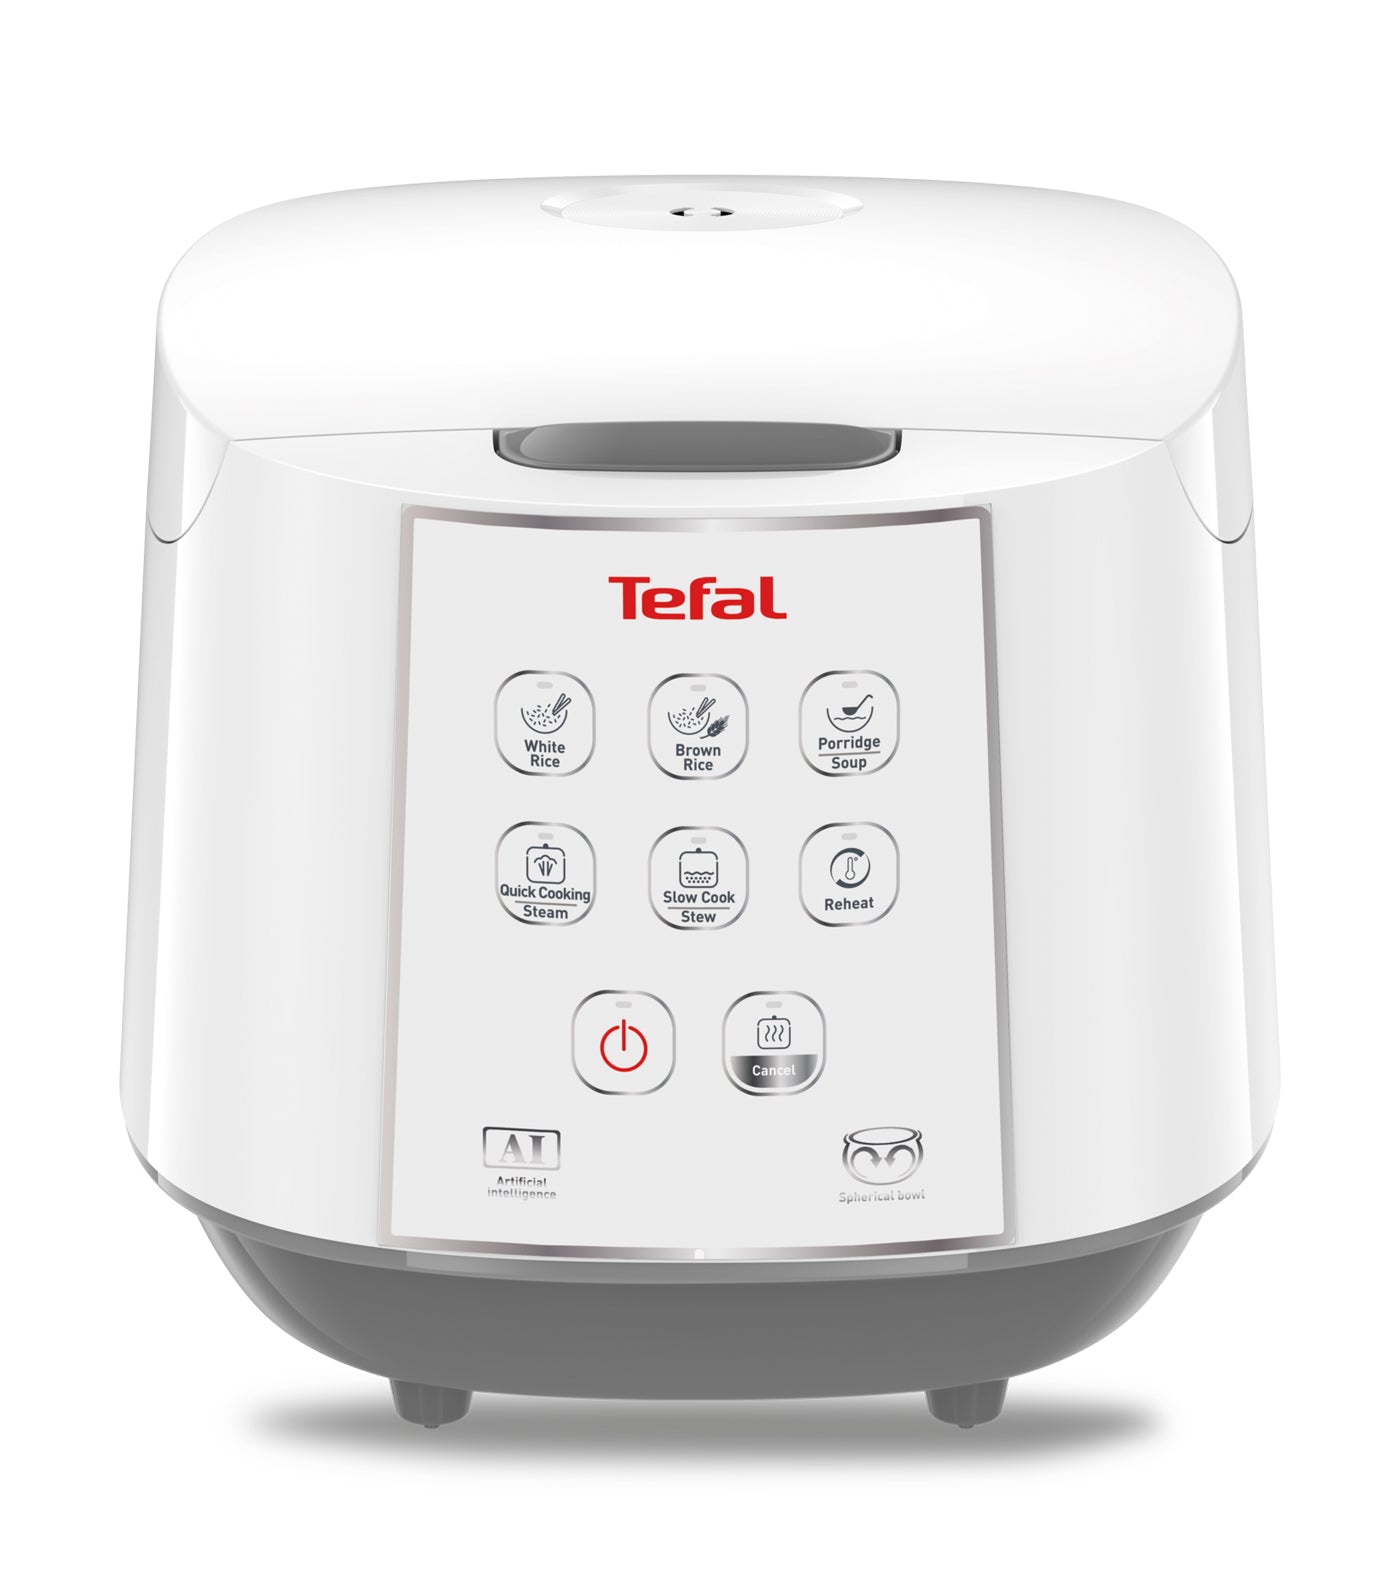 Tefal Home Chef Smart Pro Multicooker (Pressure Cooker) (CY625) (CY625D)  [Free Stainless Steel Pot]